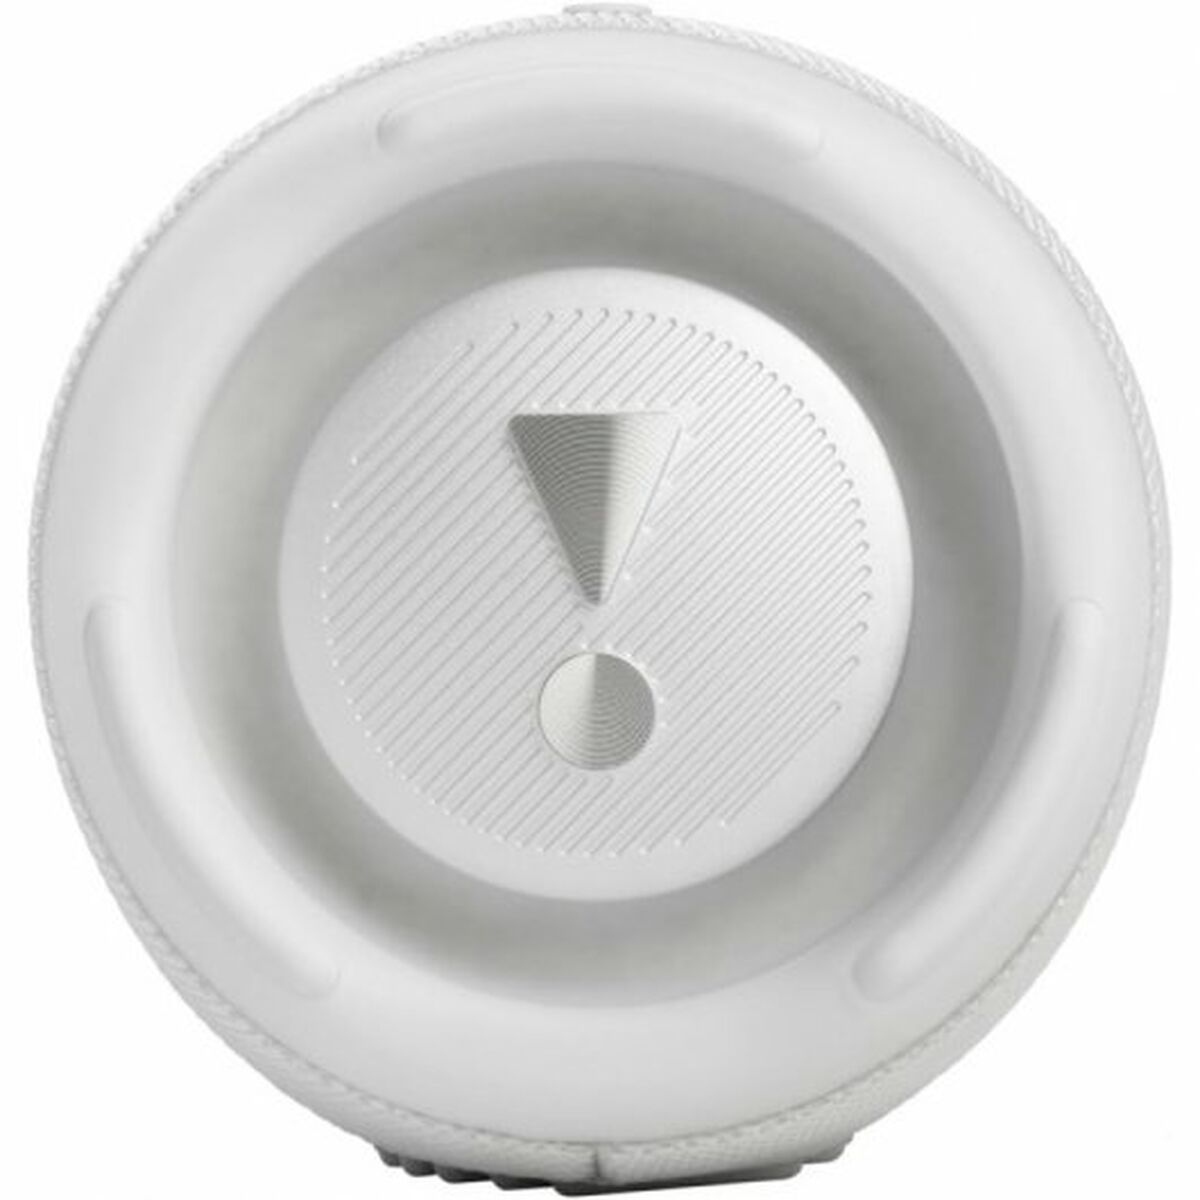 Portable Bluetooth Speakers JBL JBLCHARGE5WHT White, JBL, Computing, Accessories, portable-bluetooth-speakers-jbl-jblcharge5wht-white, Brand_JBL, category-reference-2609, category-reference-2642, category-reference-2945, category-reference-t-19685, category-reference-t-19908, category-reference-t-21340, category-reference-t-25571, computers / peripherals, Condition_NEW, entertainment, music, office, Price_100 - 200, Teleworking, RiotNook